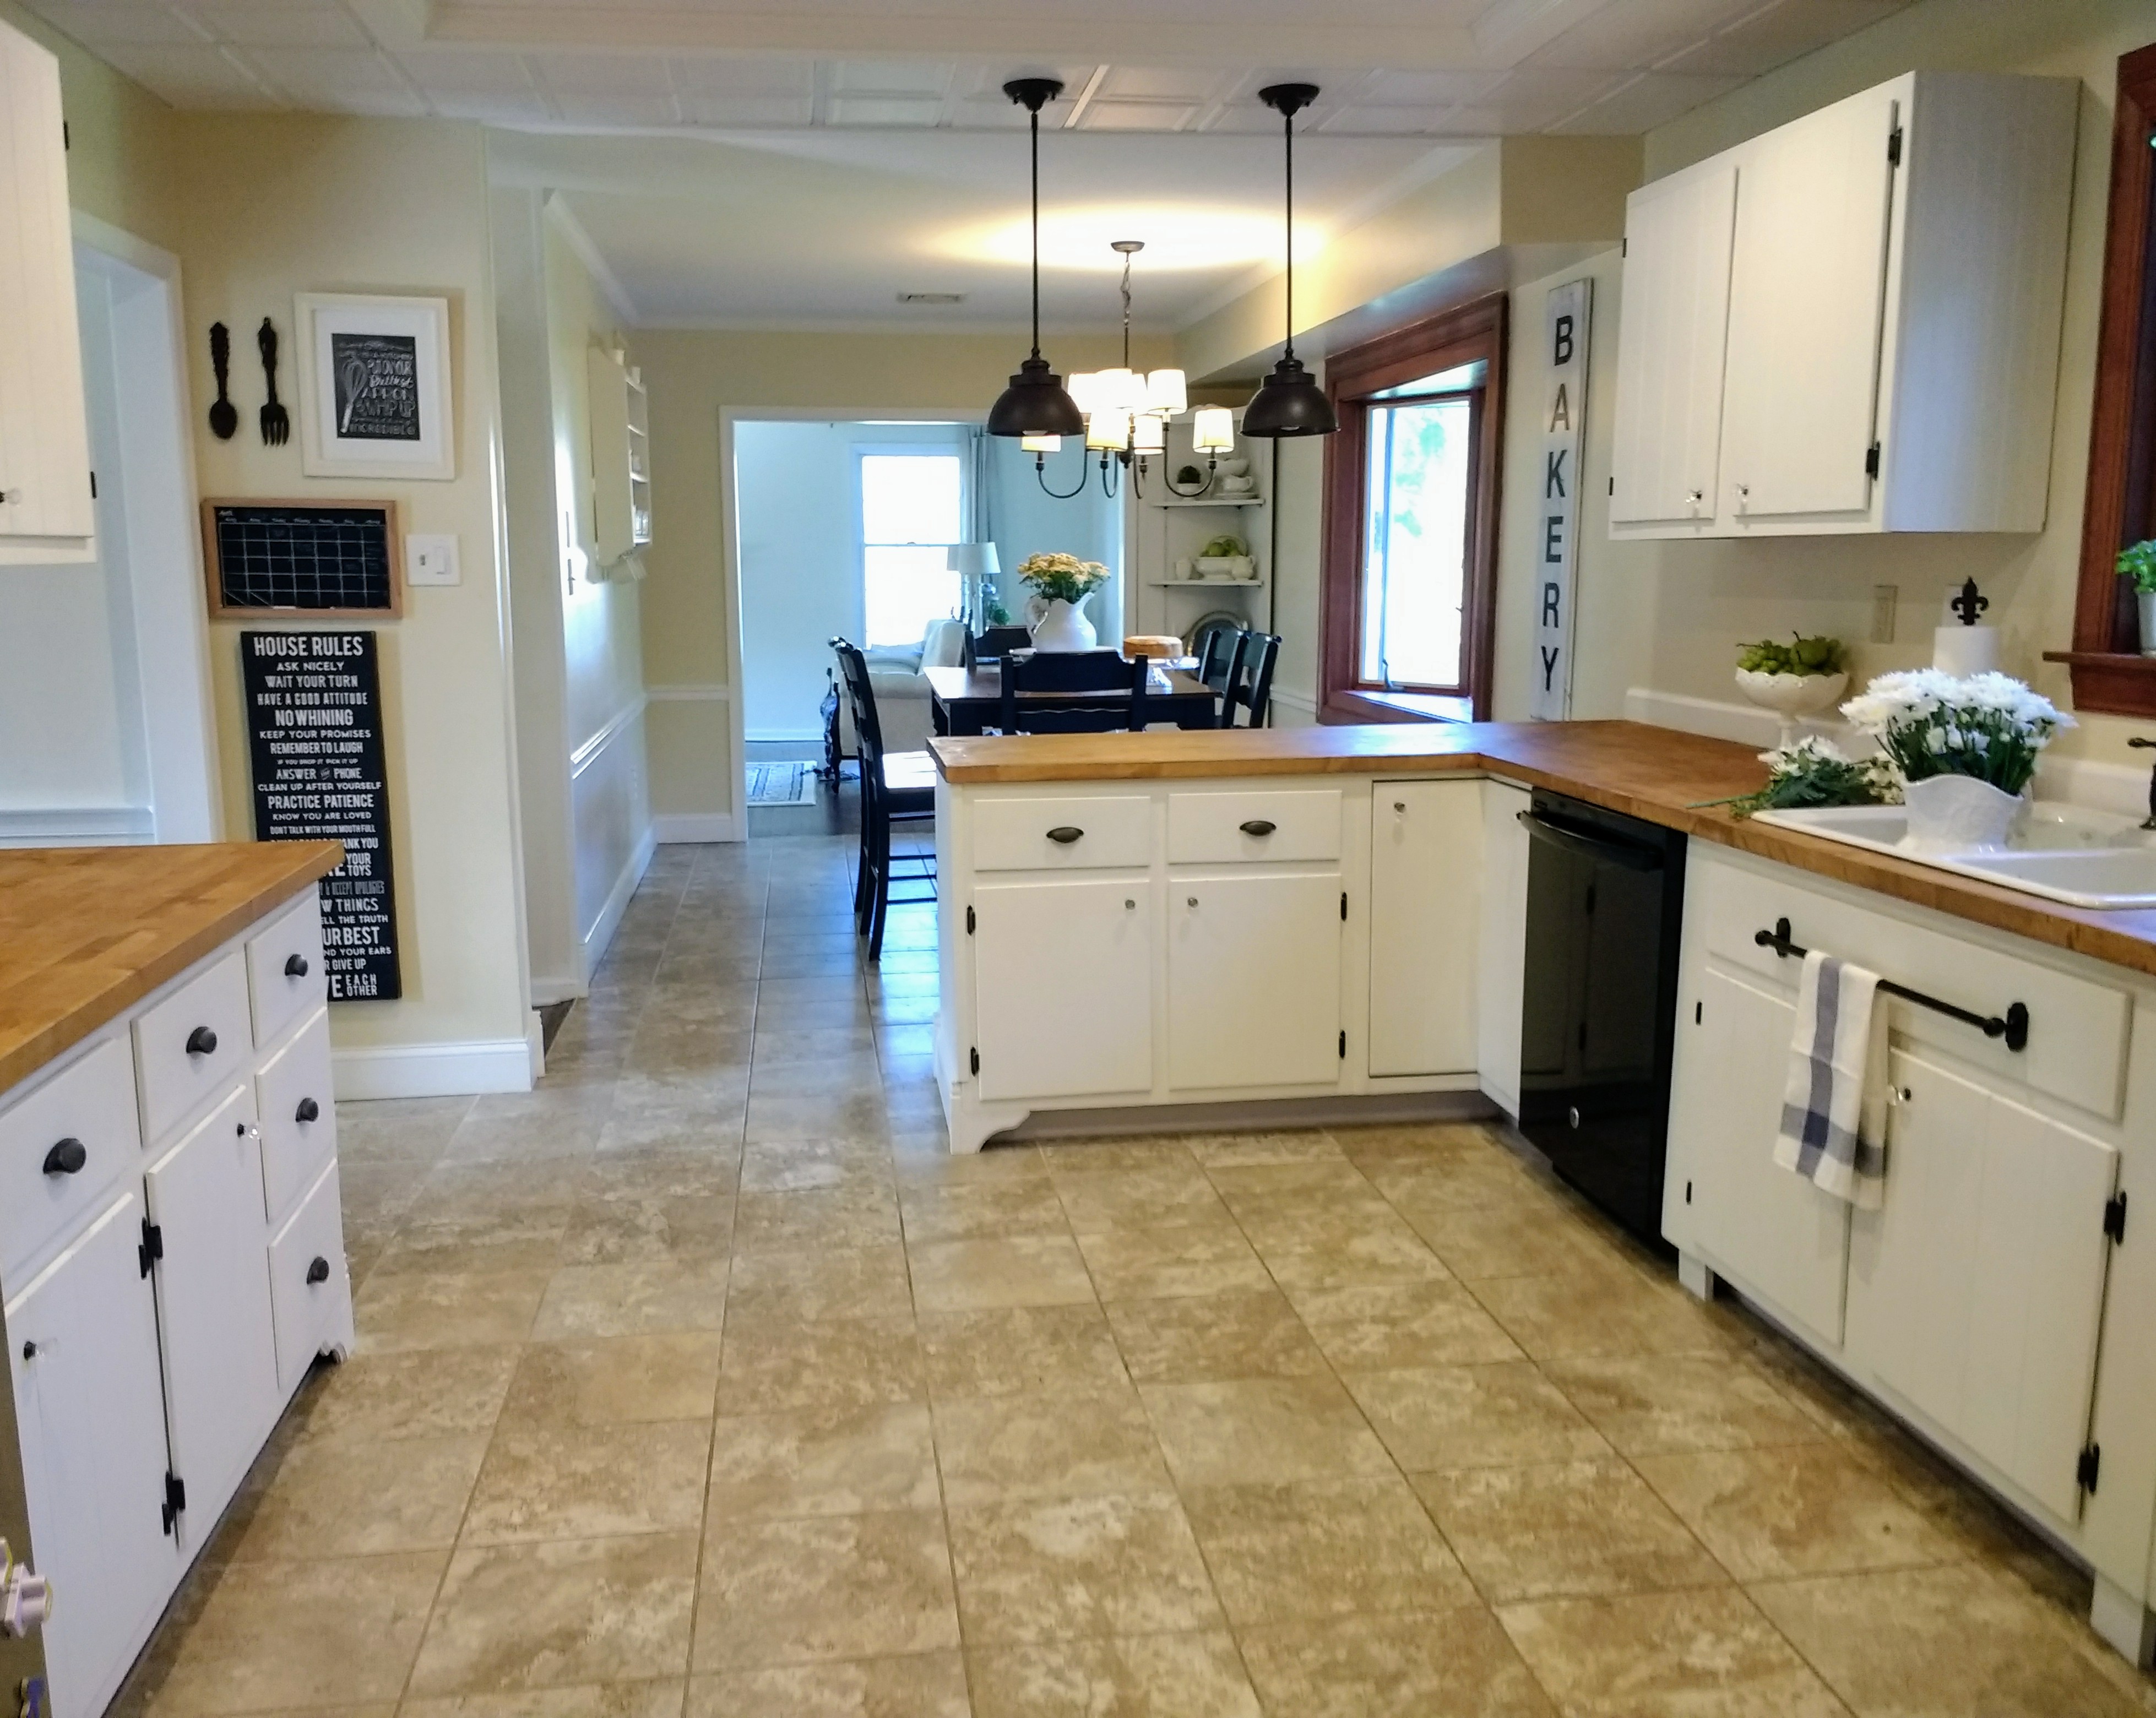 Our Diy Kitchen Remodel Before And After Tackling A Farmhouse